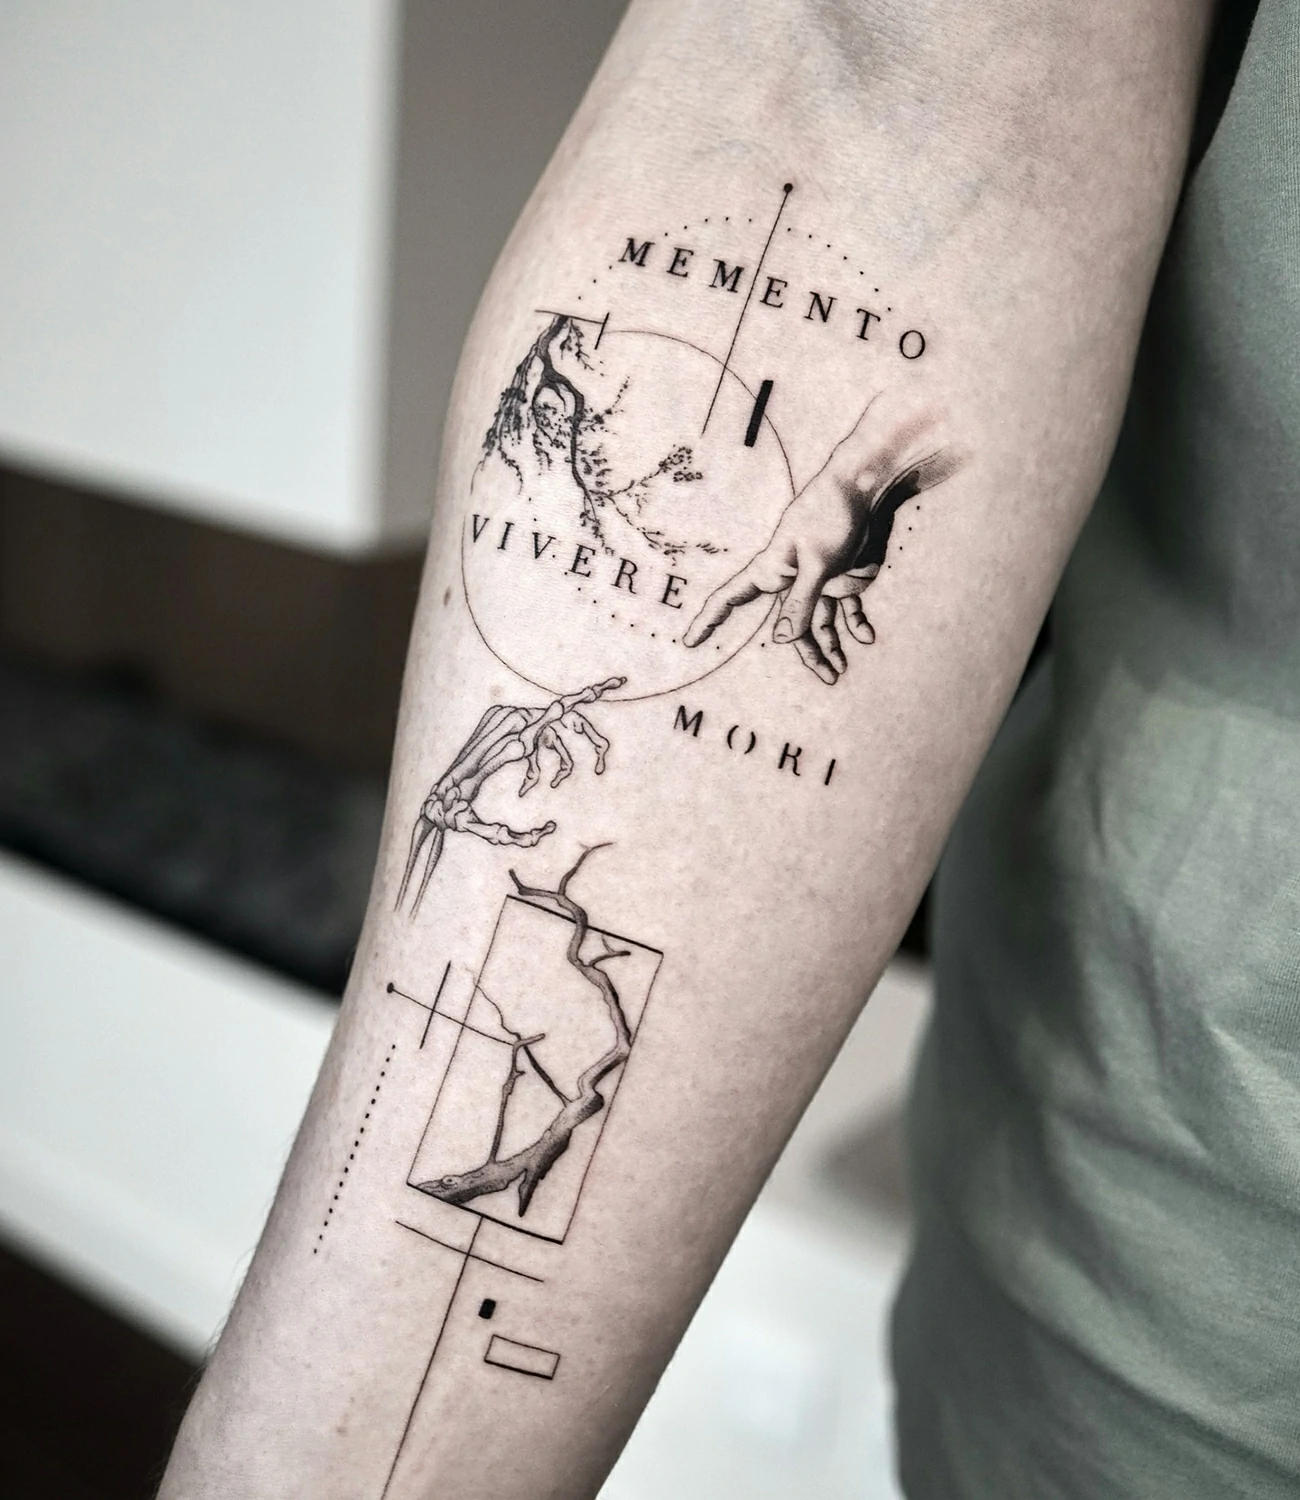 forearm memento mori tattoo: A detailed description of a "memento mori" tattoo designed specifically for placement on the forearm, possibly wrapping around the arm.